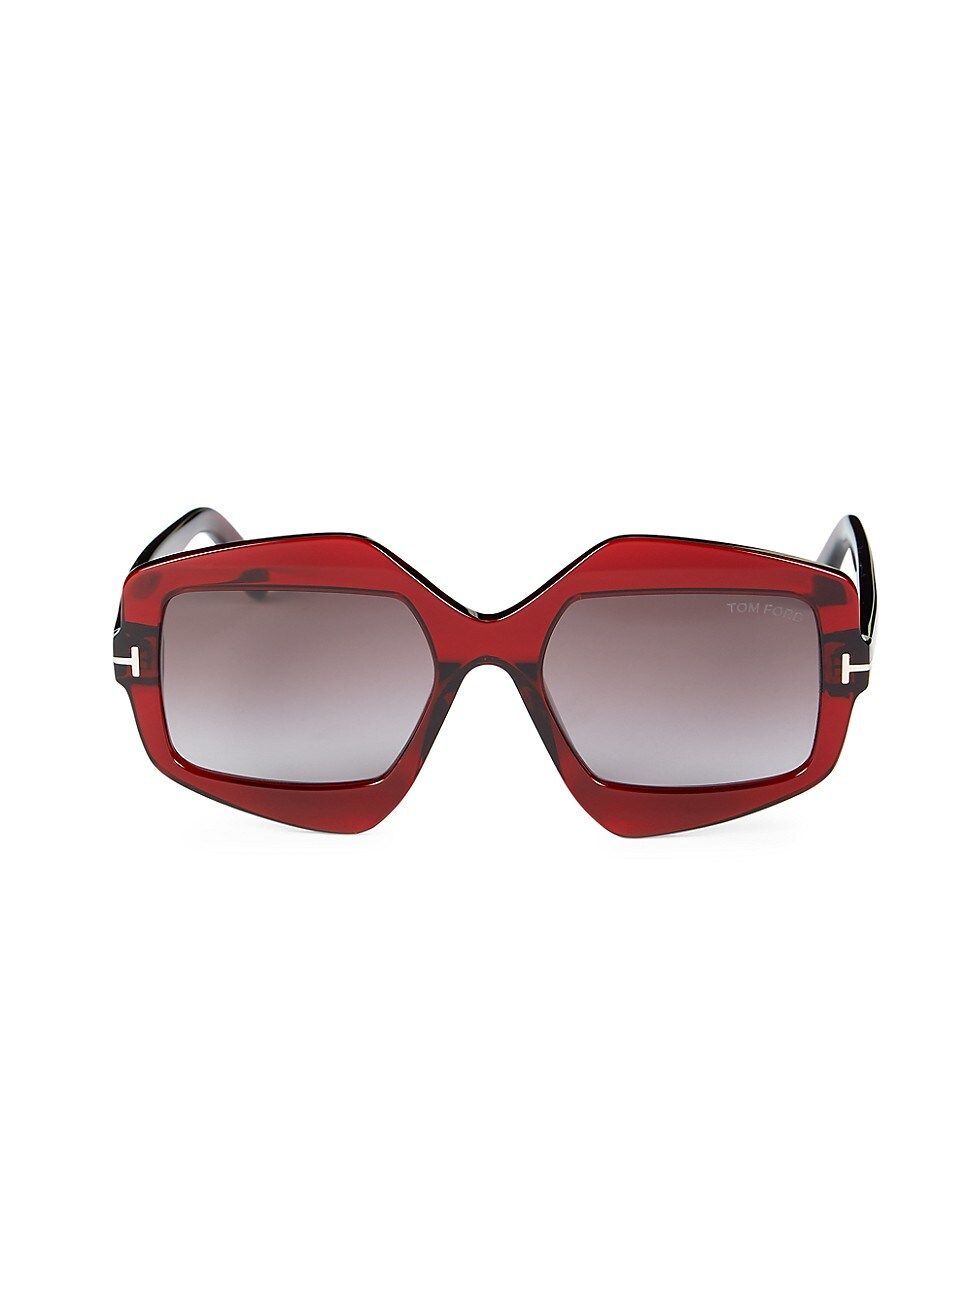 Tom Ford Women's Tate 55MM Rectangle Sunglasses - Red | Saks Fifth Avenue